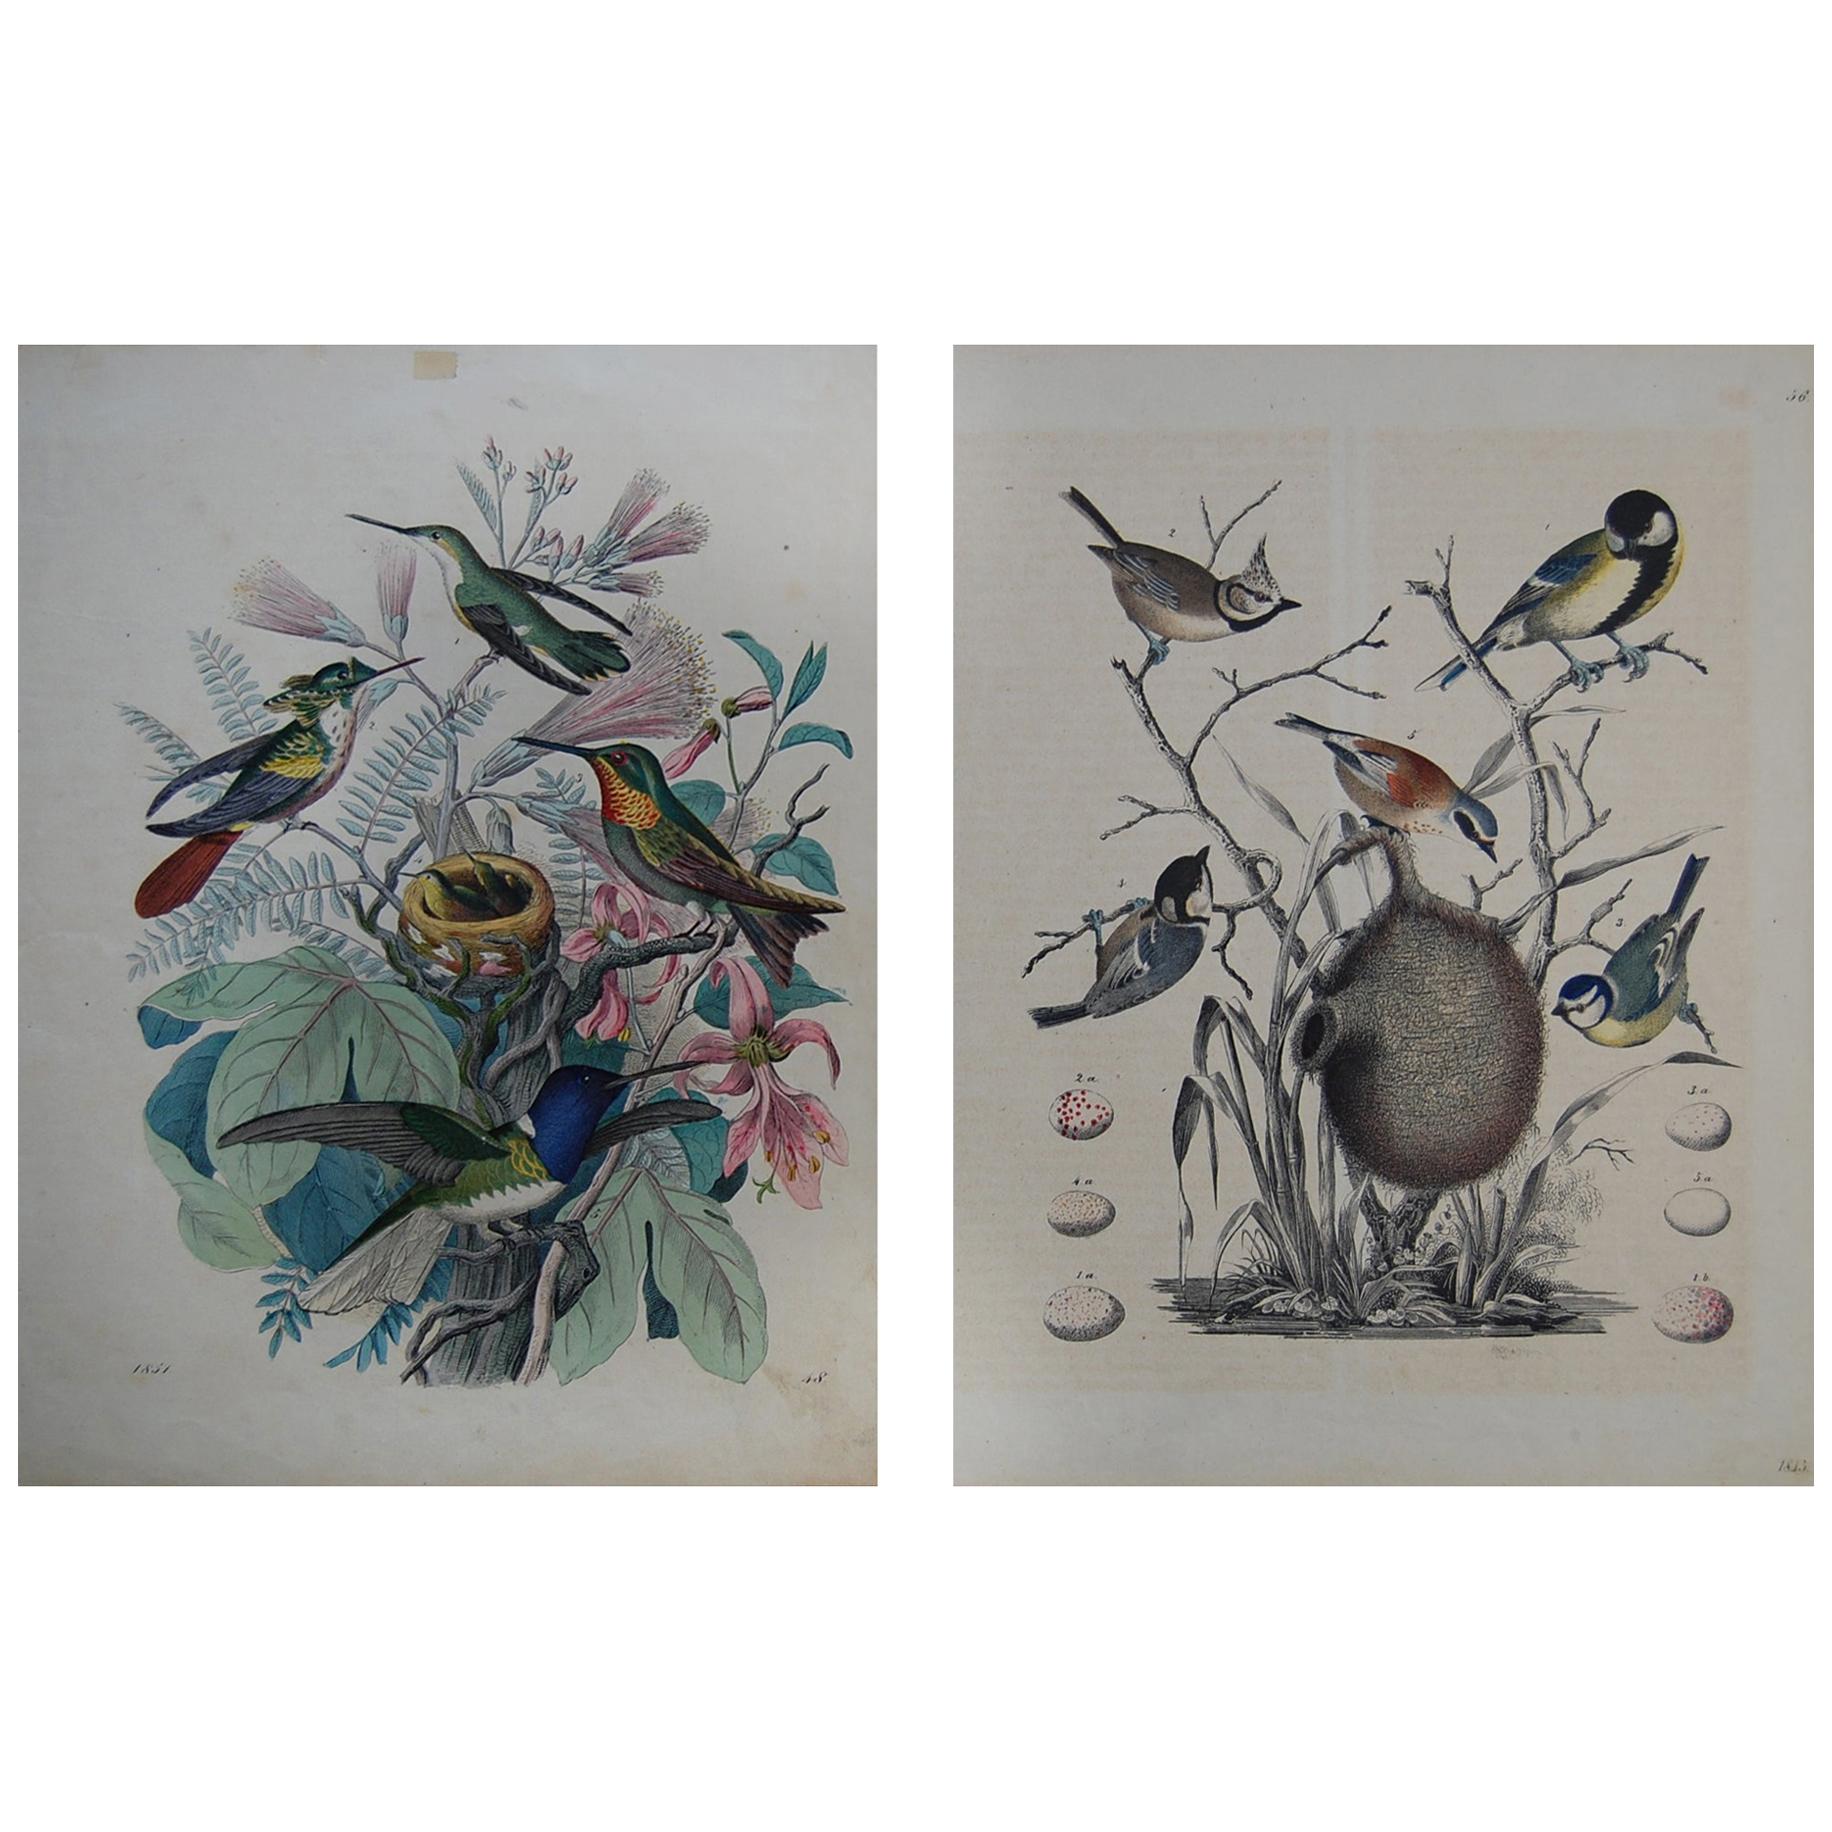 Two Hand Colored 19th Century Prints Depicting Bird Species and Nests